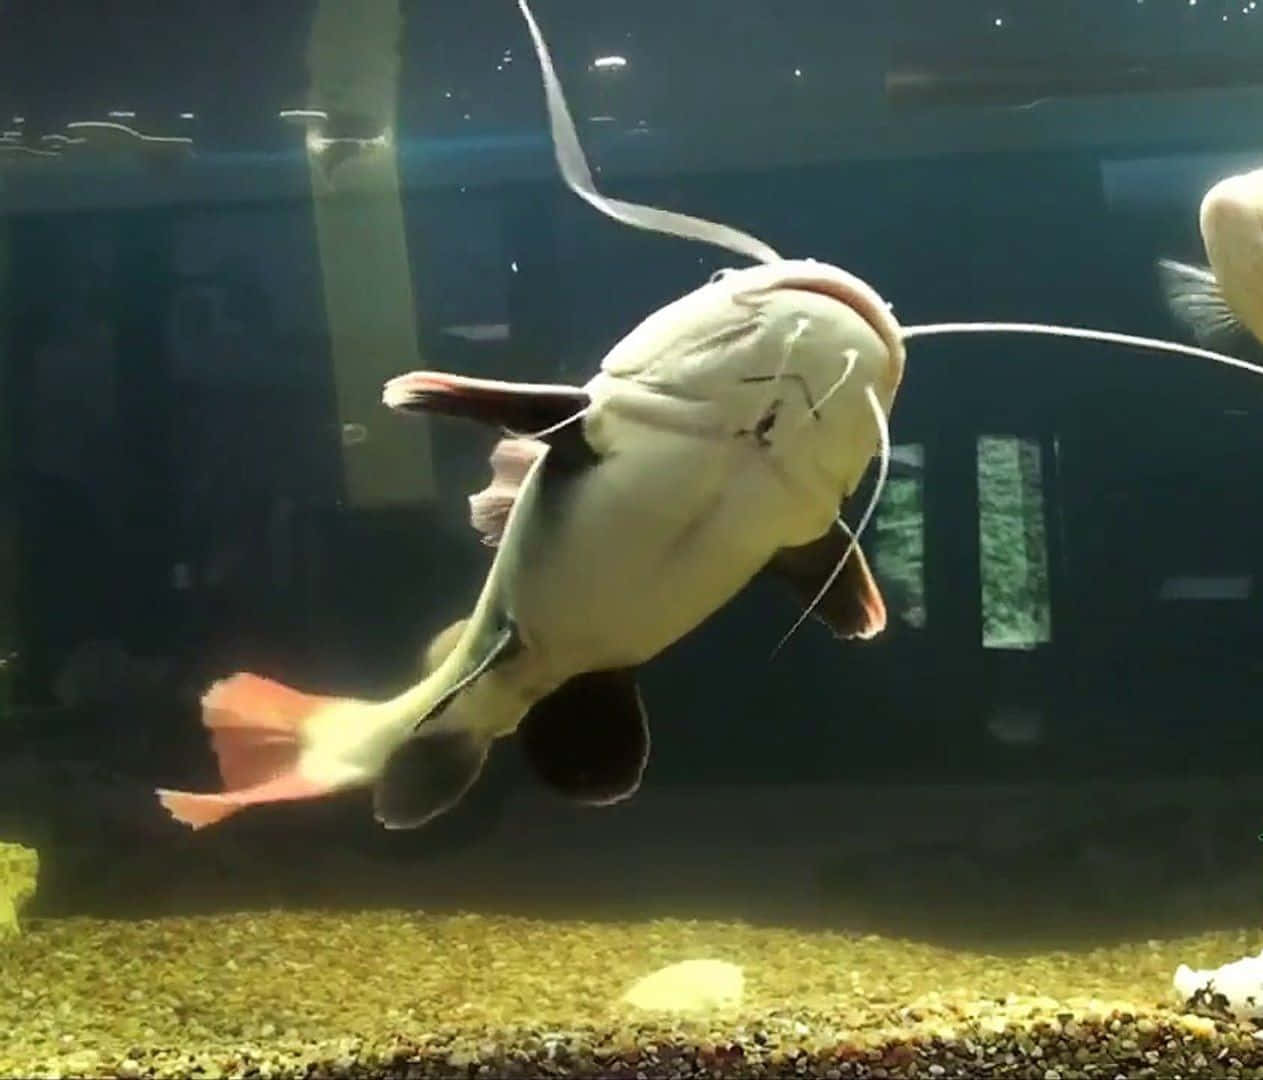 A close-up image of a majestic catfish swimming underwater